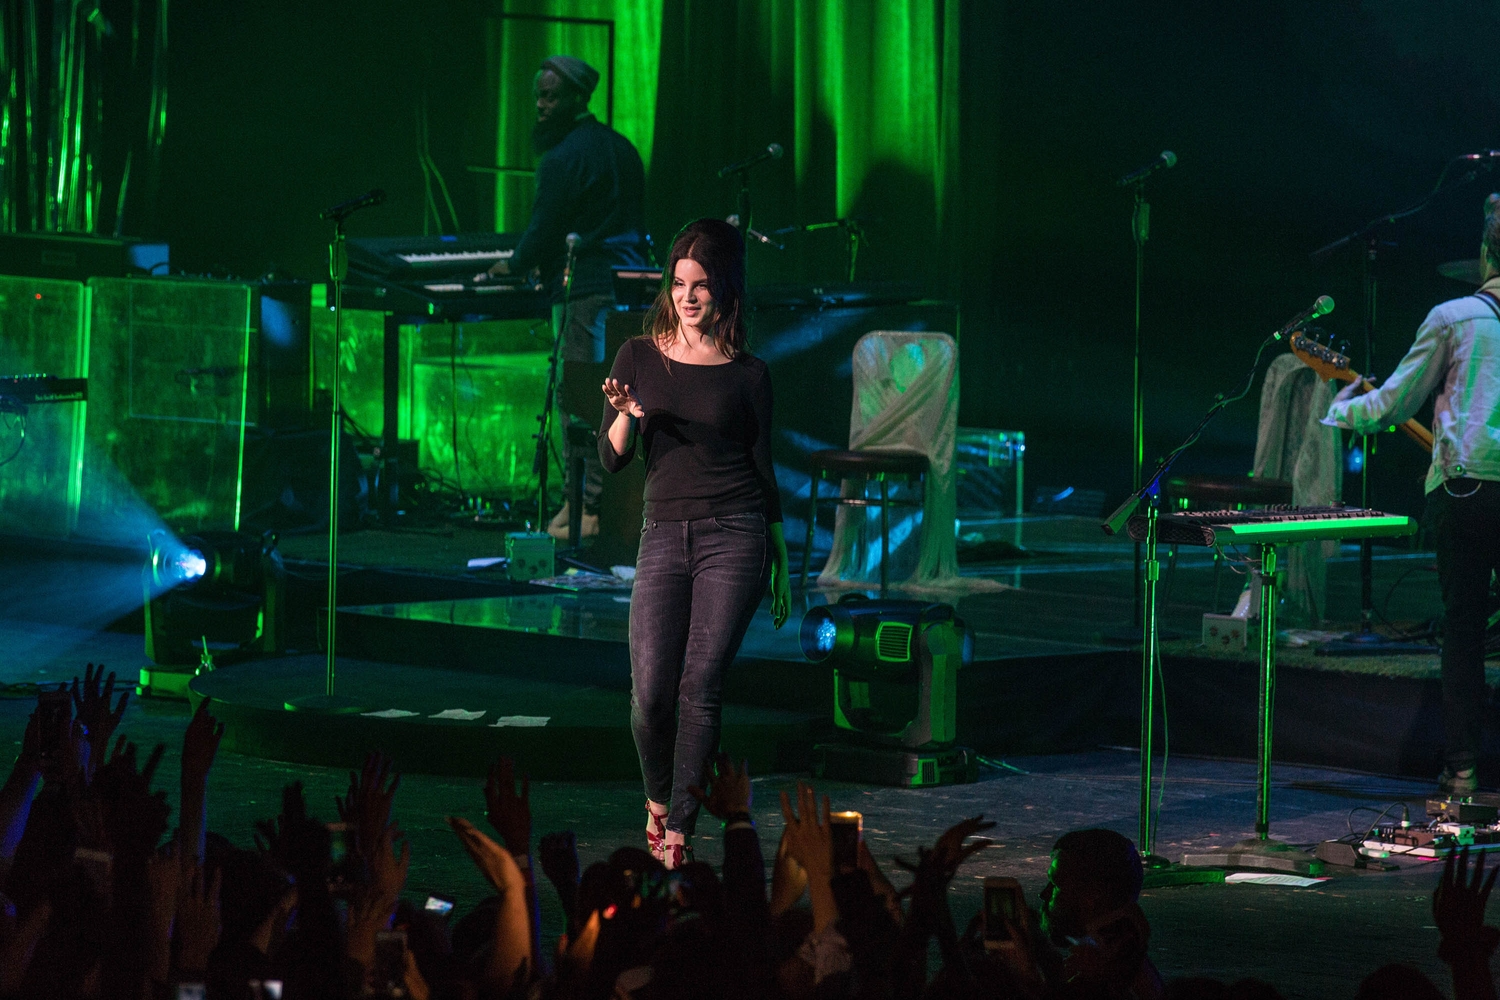 Watch Lana Del Rey play ‘Mariners Apartment Complex’ live for the first time